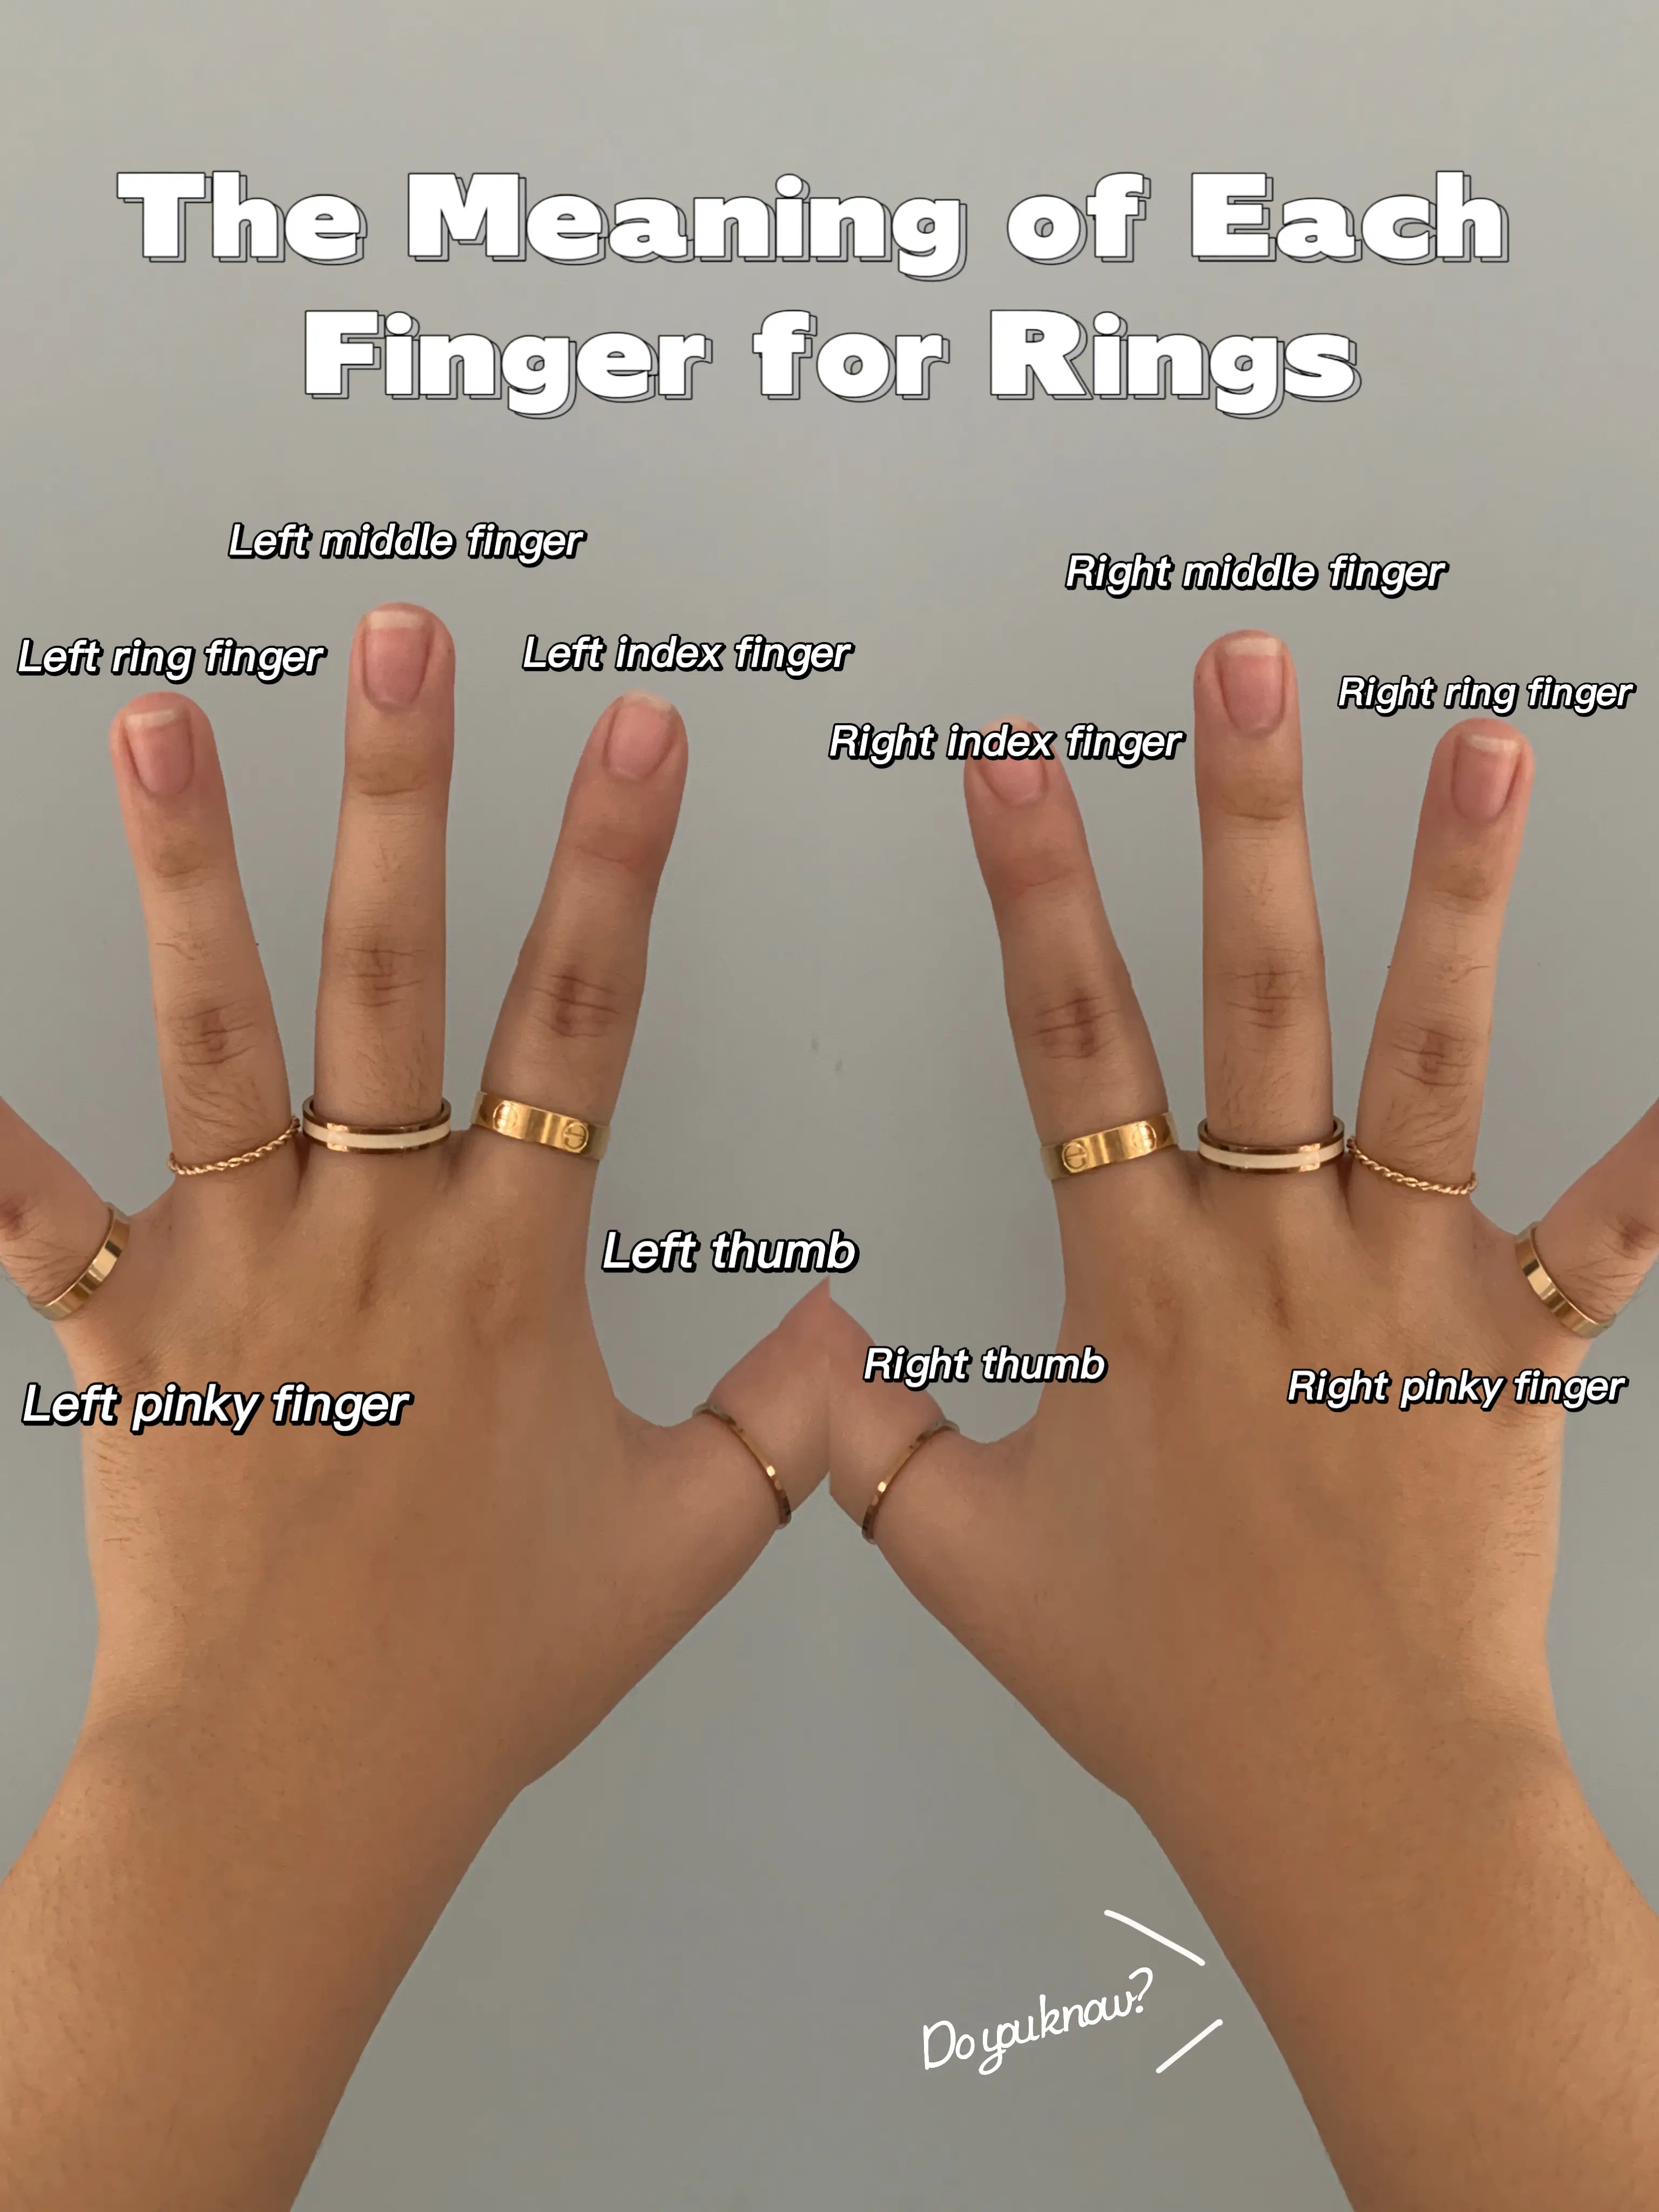 what each finger represents